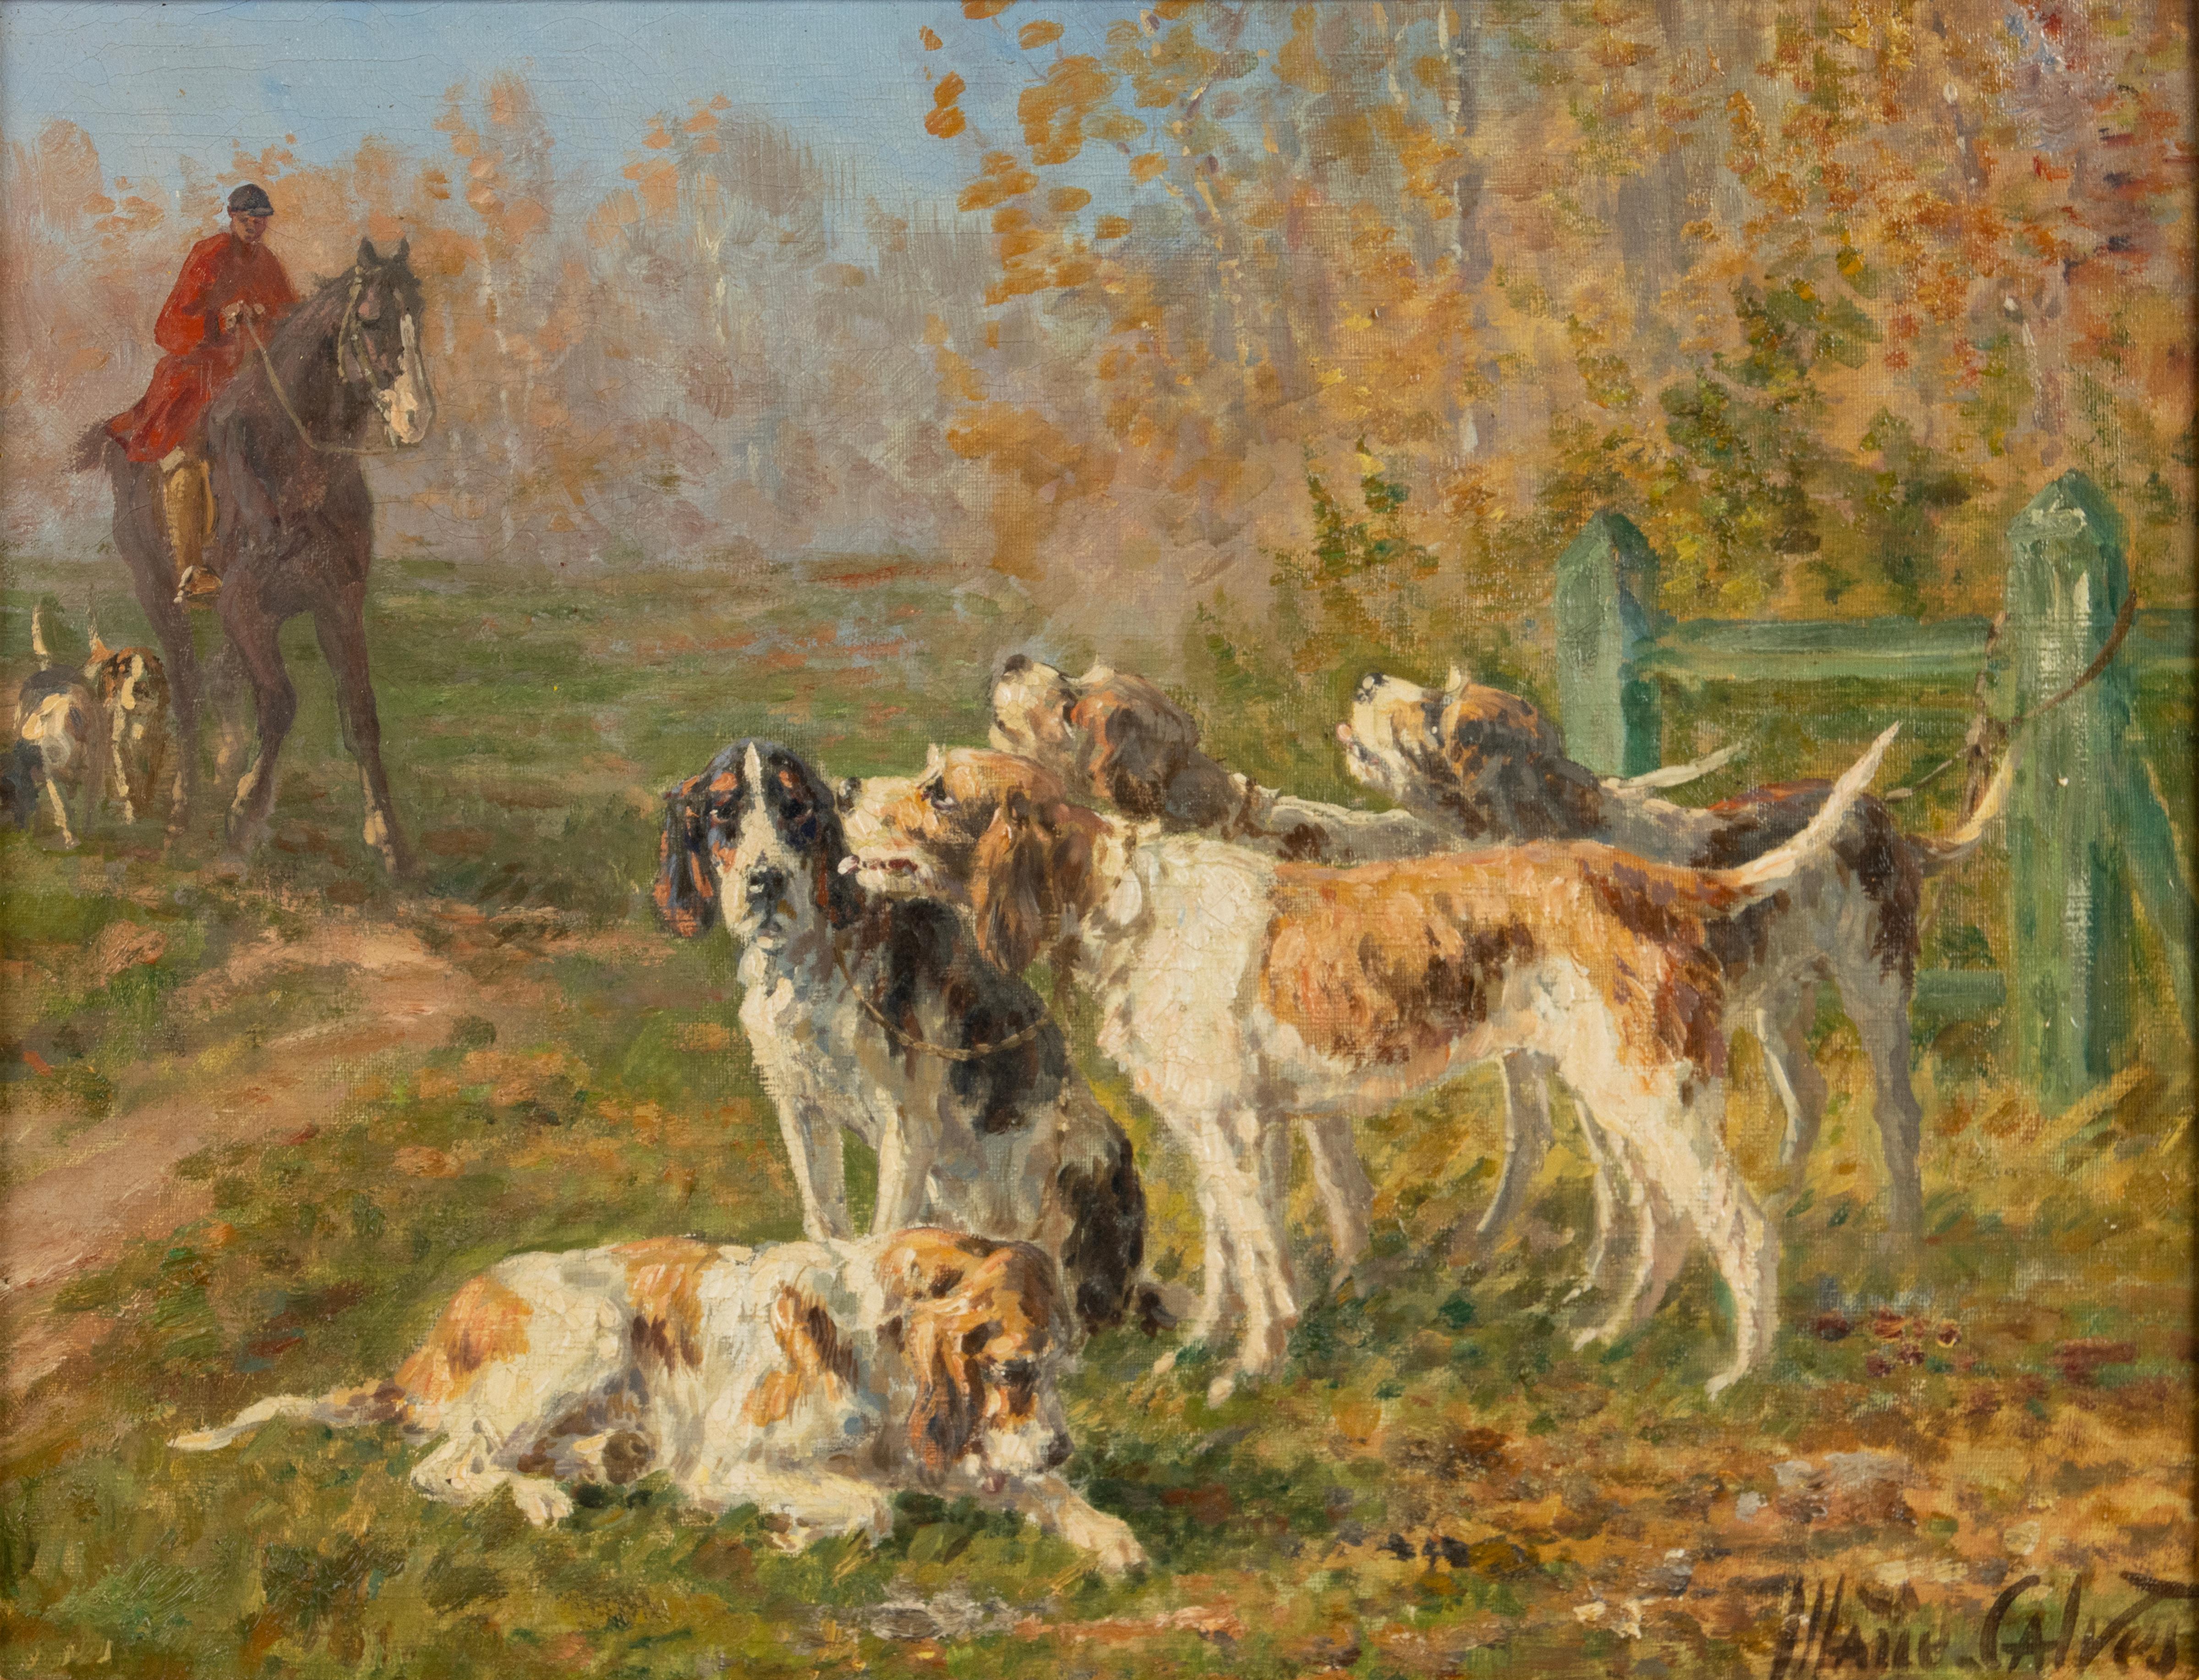 A beautiful oil painting, depicting a pack of hunting dogs in the field, made by the French artist Marie-Didière Calves. 
The style is somewhat impressionistic. Seen up close, a bit vague, but seen from a greater distance, a clear image with a lot